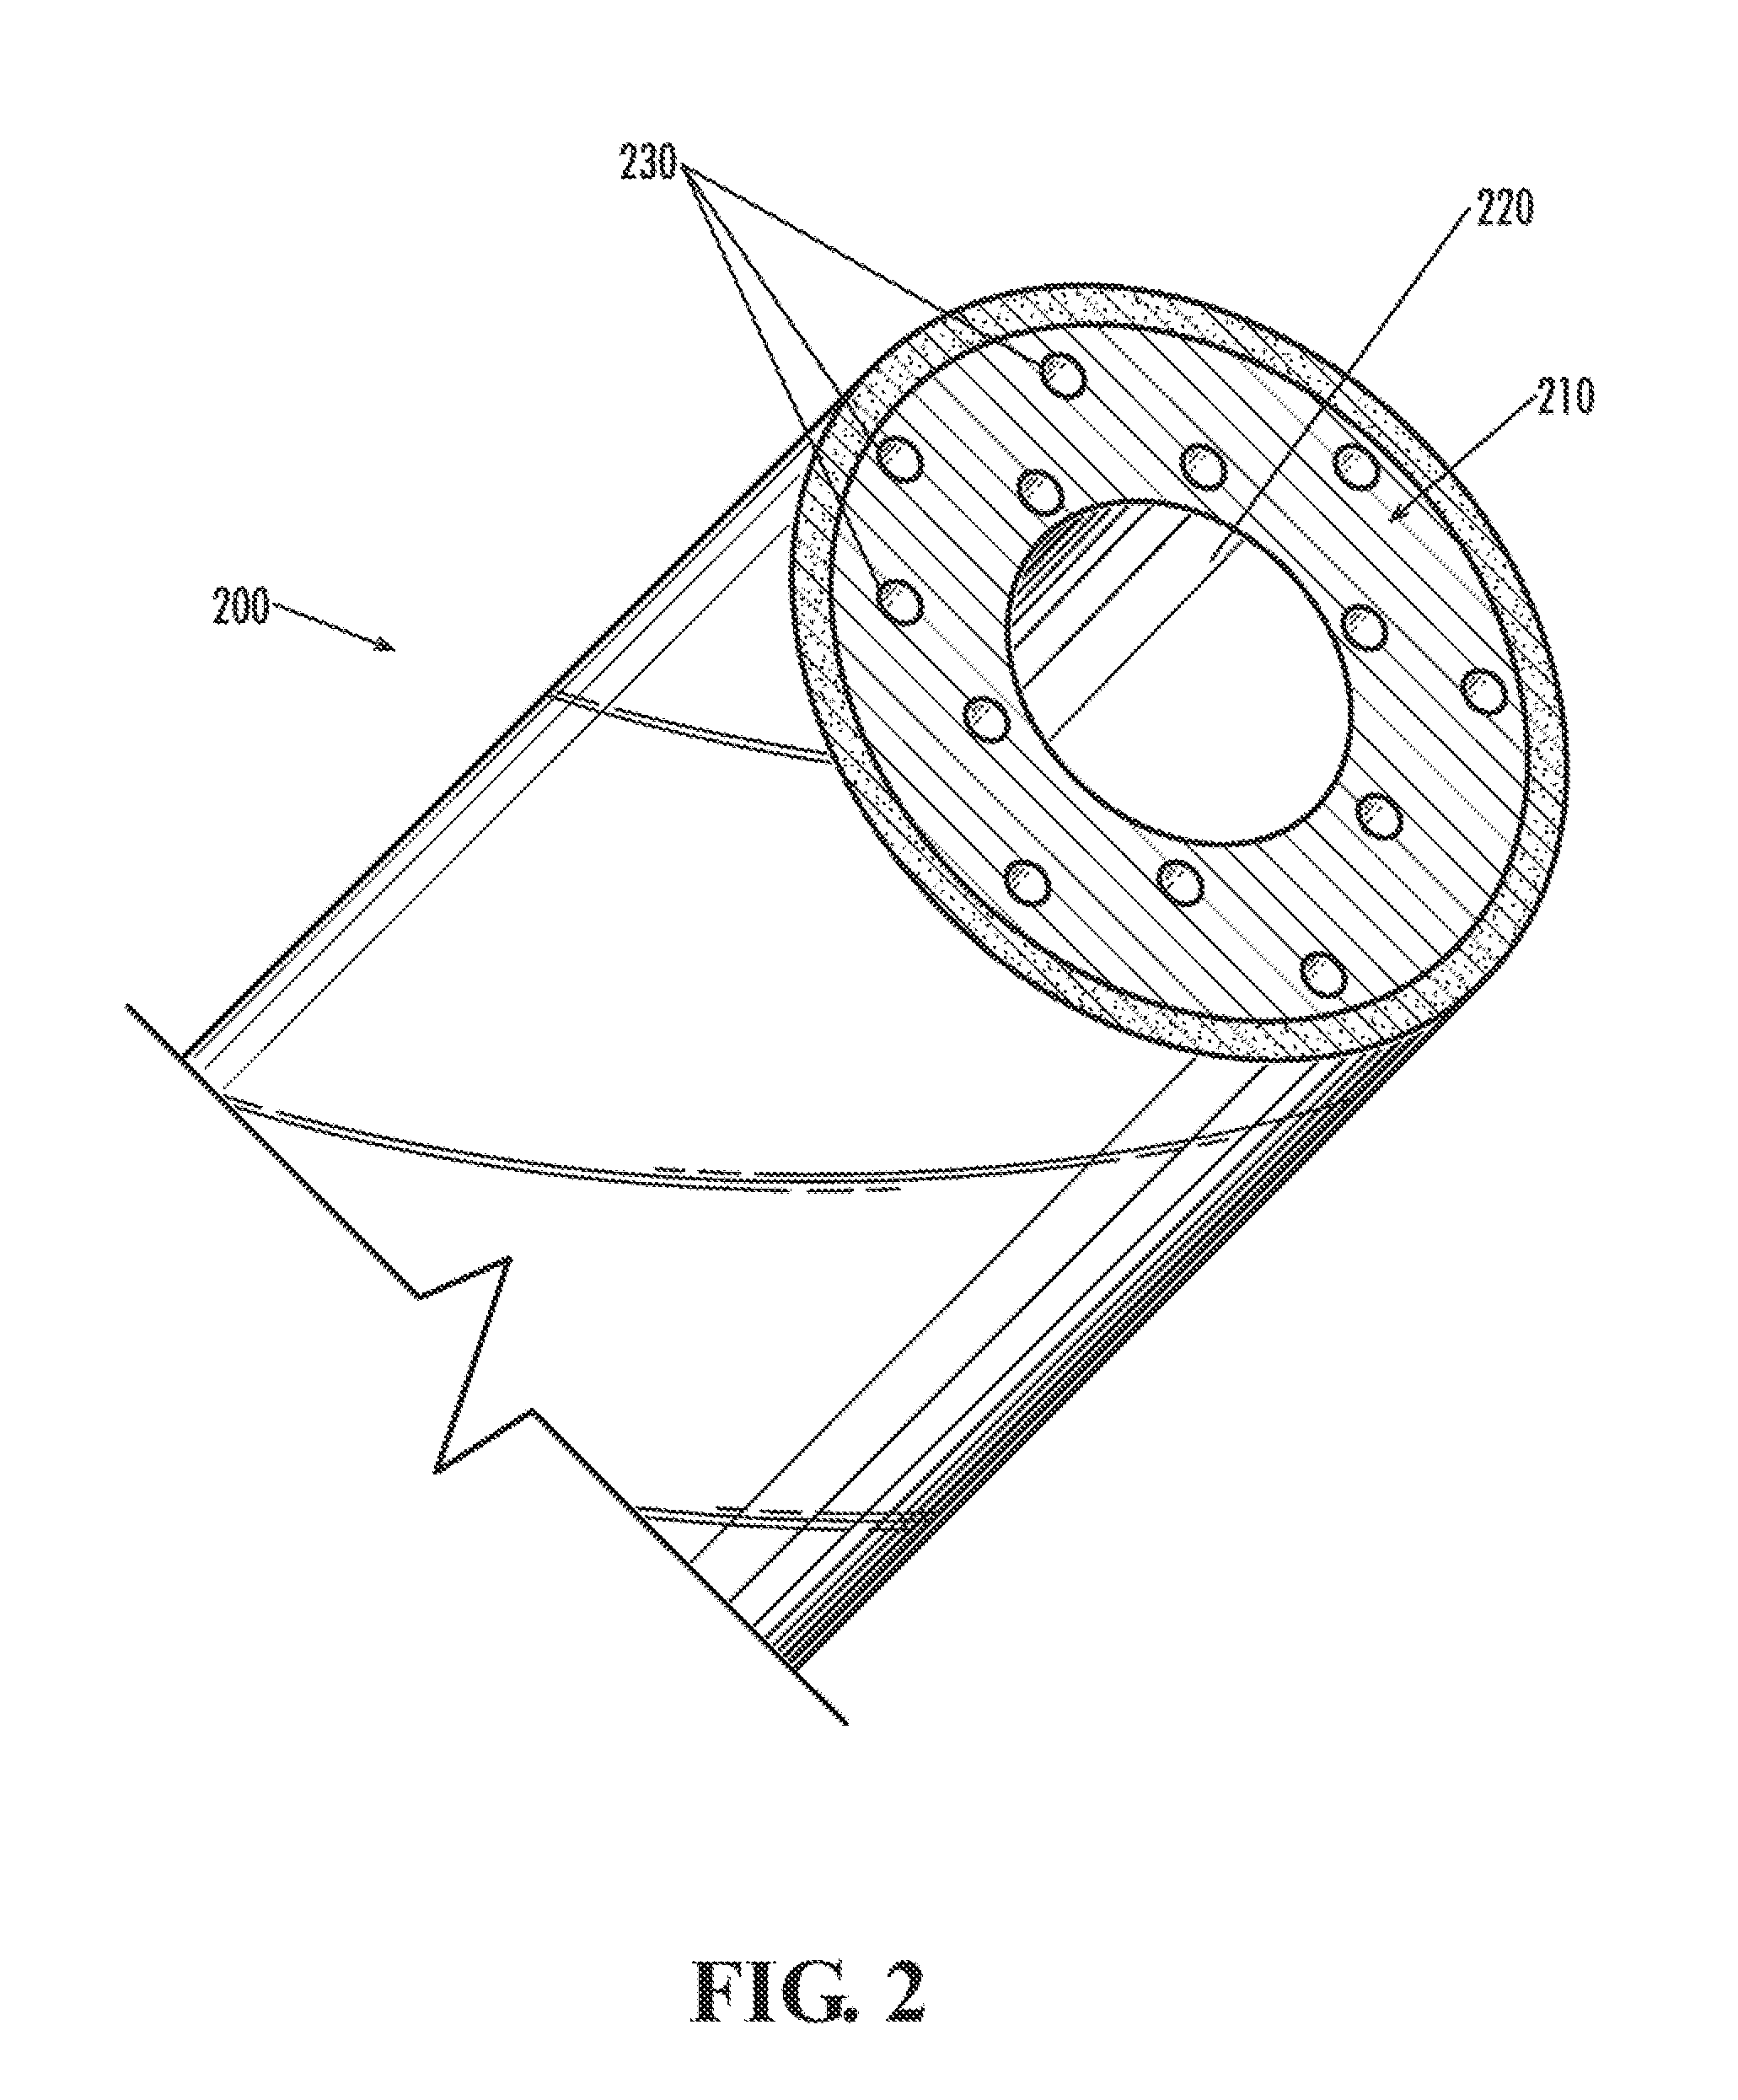 Intravascular Cerebral Catheter Device and Method of Use